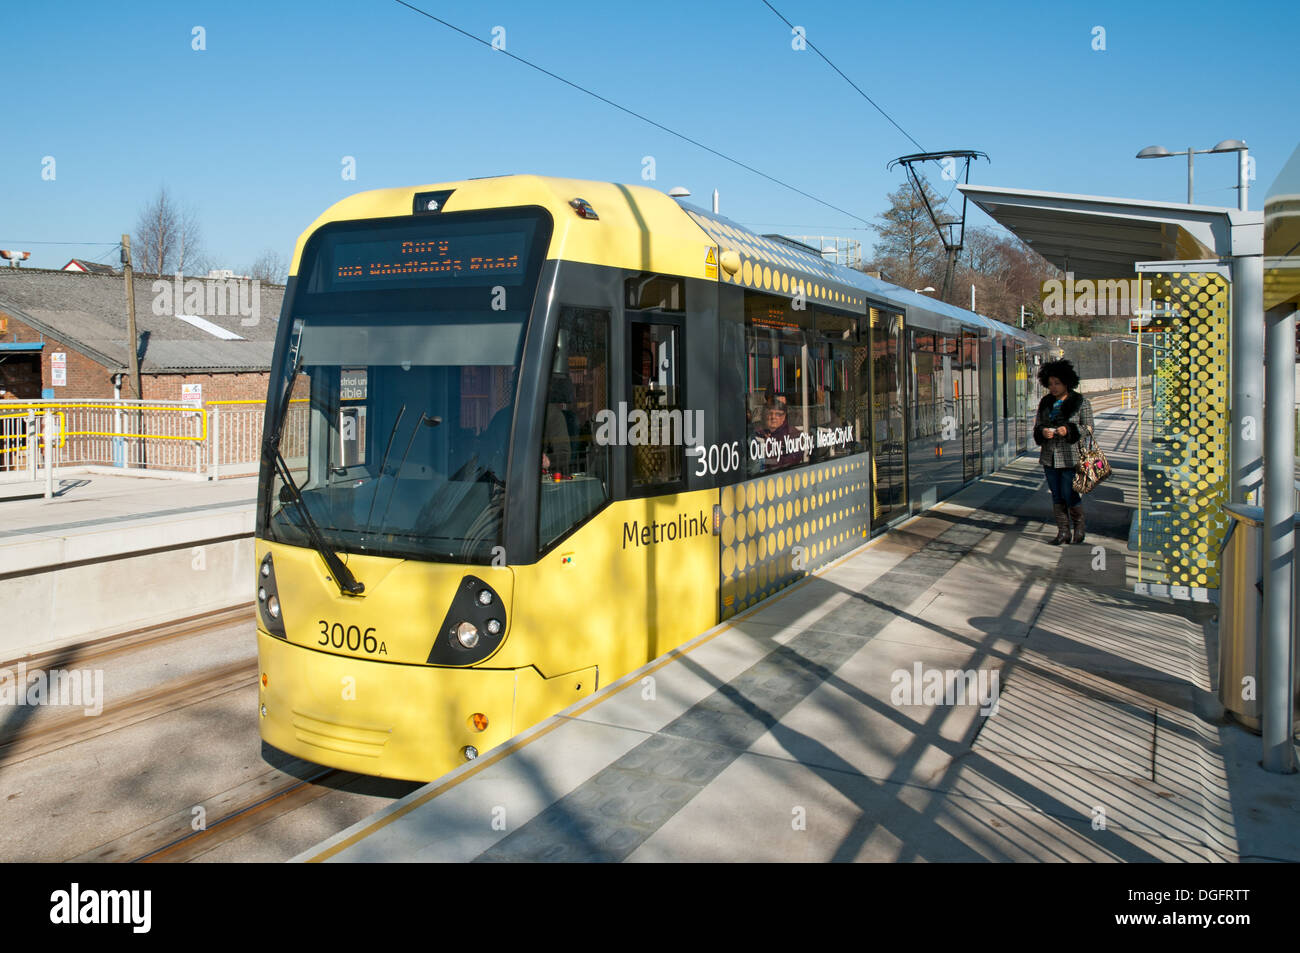 Metrolink tram at the Holt Town stop, on the East Manchester Line, Ancoats, Manchester, England, UK Stock Photo